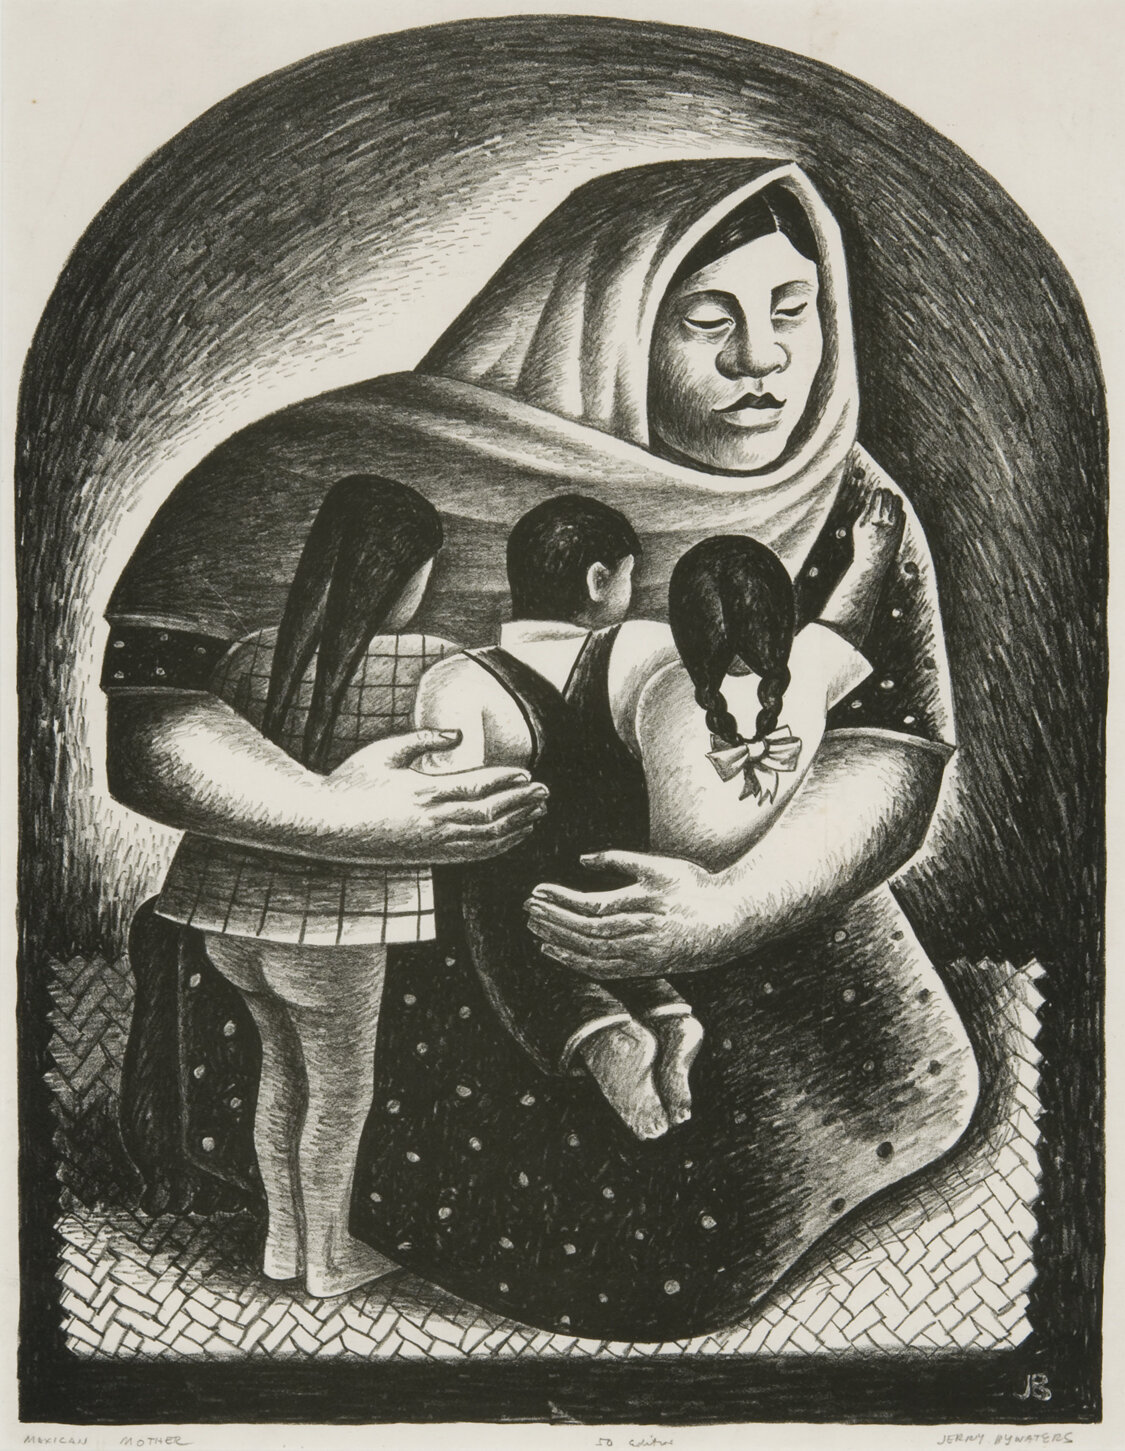 Jerry&nbsp;Bywaters, Mexican Mother,&nbsp;1936, lithograph, Collection of the Grace Museum, Gift of the 2016 Collectors Circle.